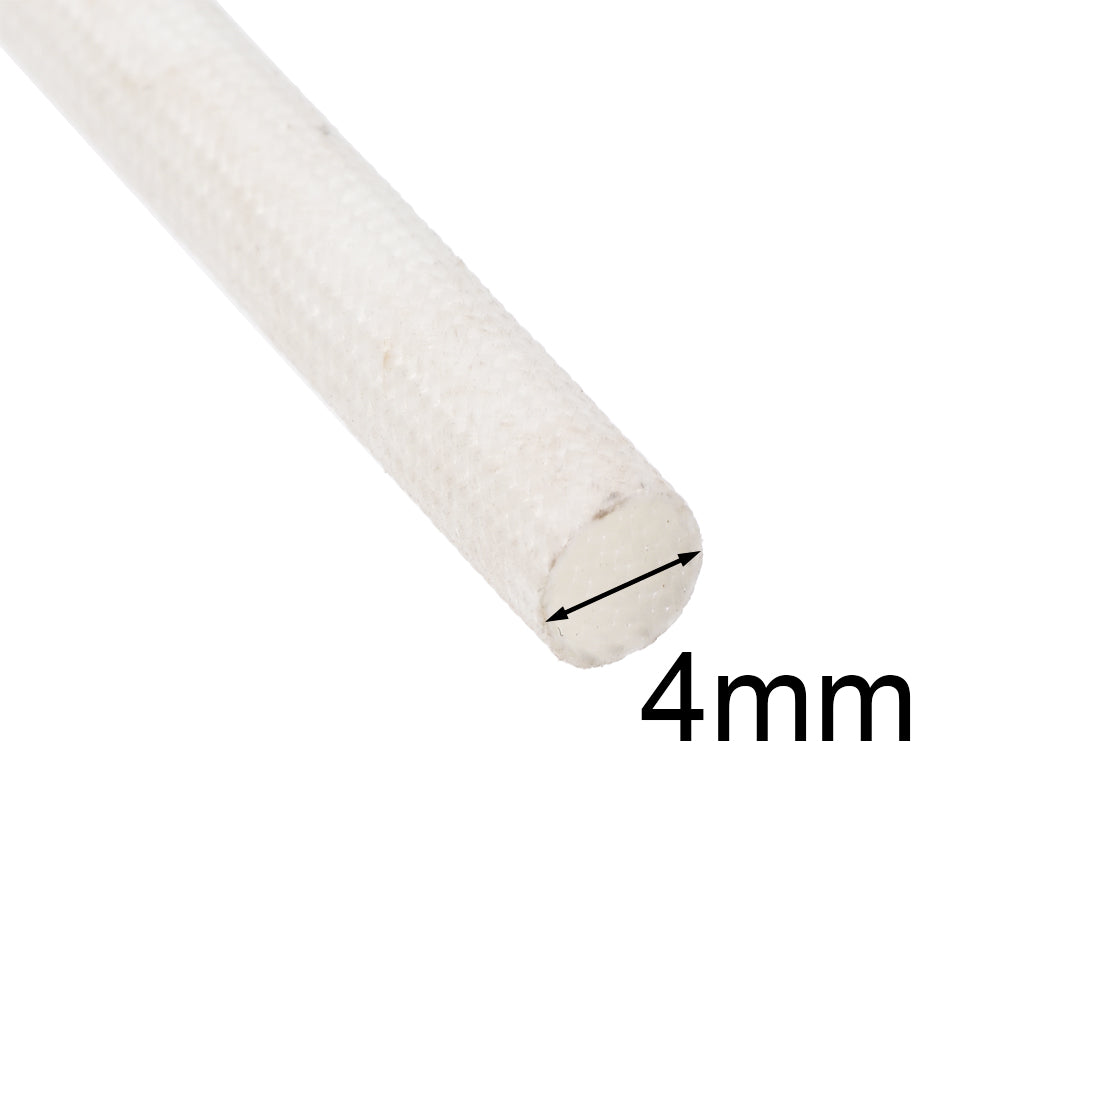 uxcell Uxcell Insulation Cable Protector, 33Ft-4mm High TEMP Silicone Fiberglass Sleeve White